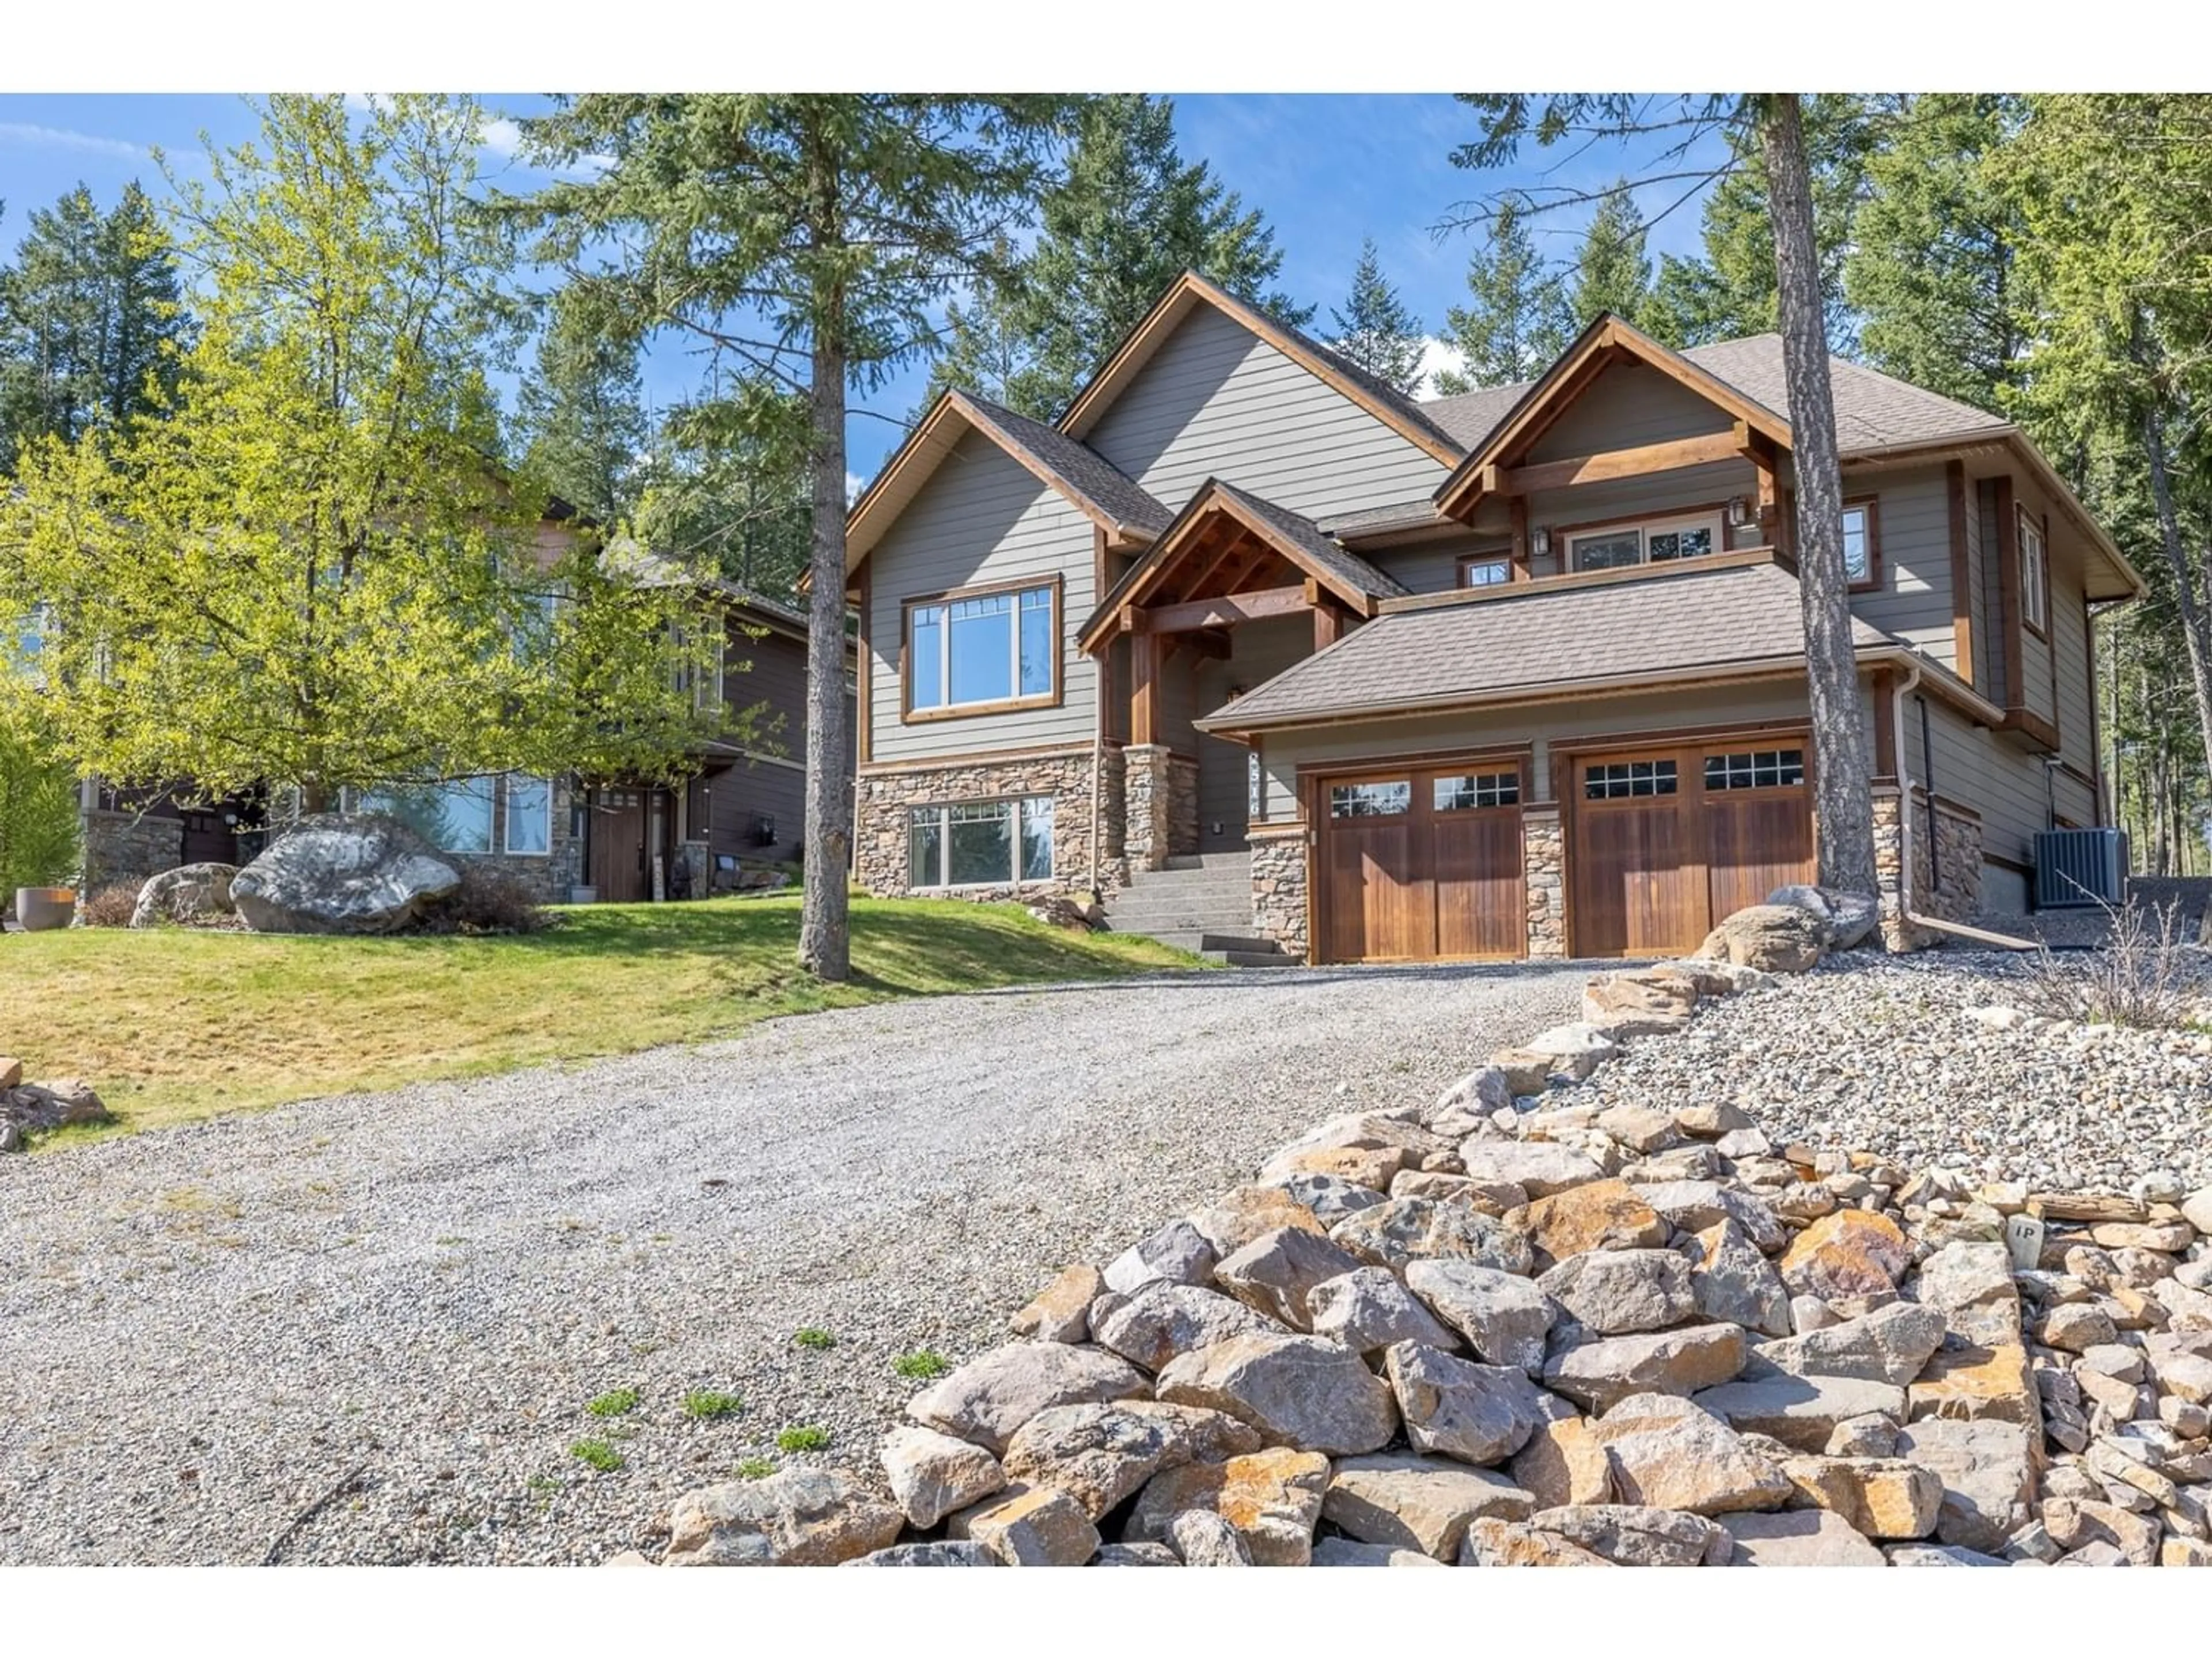 Frontside or backside of a home for 2516 COBBLESTONE CIRCLE, Invermere British Columbia V0A1K4